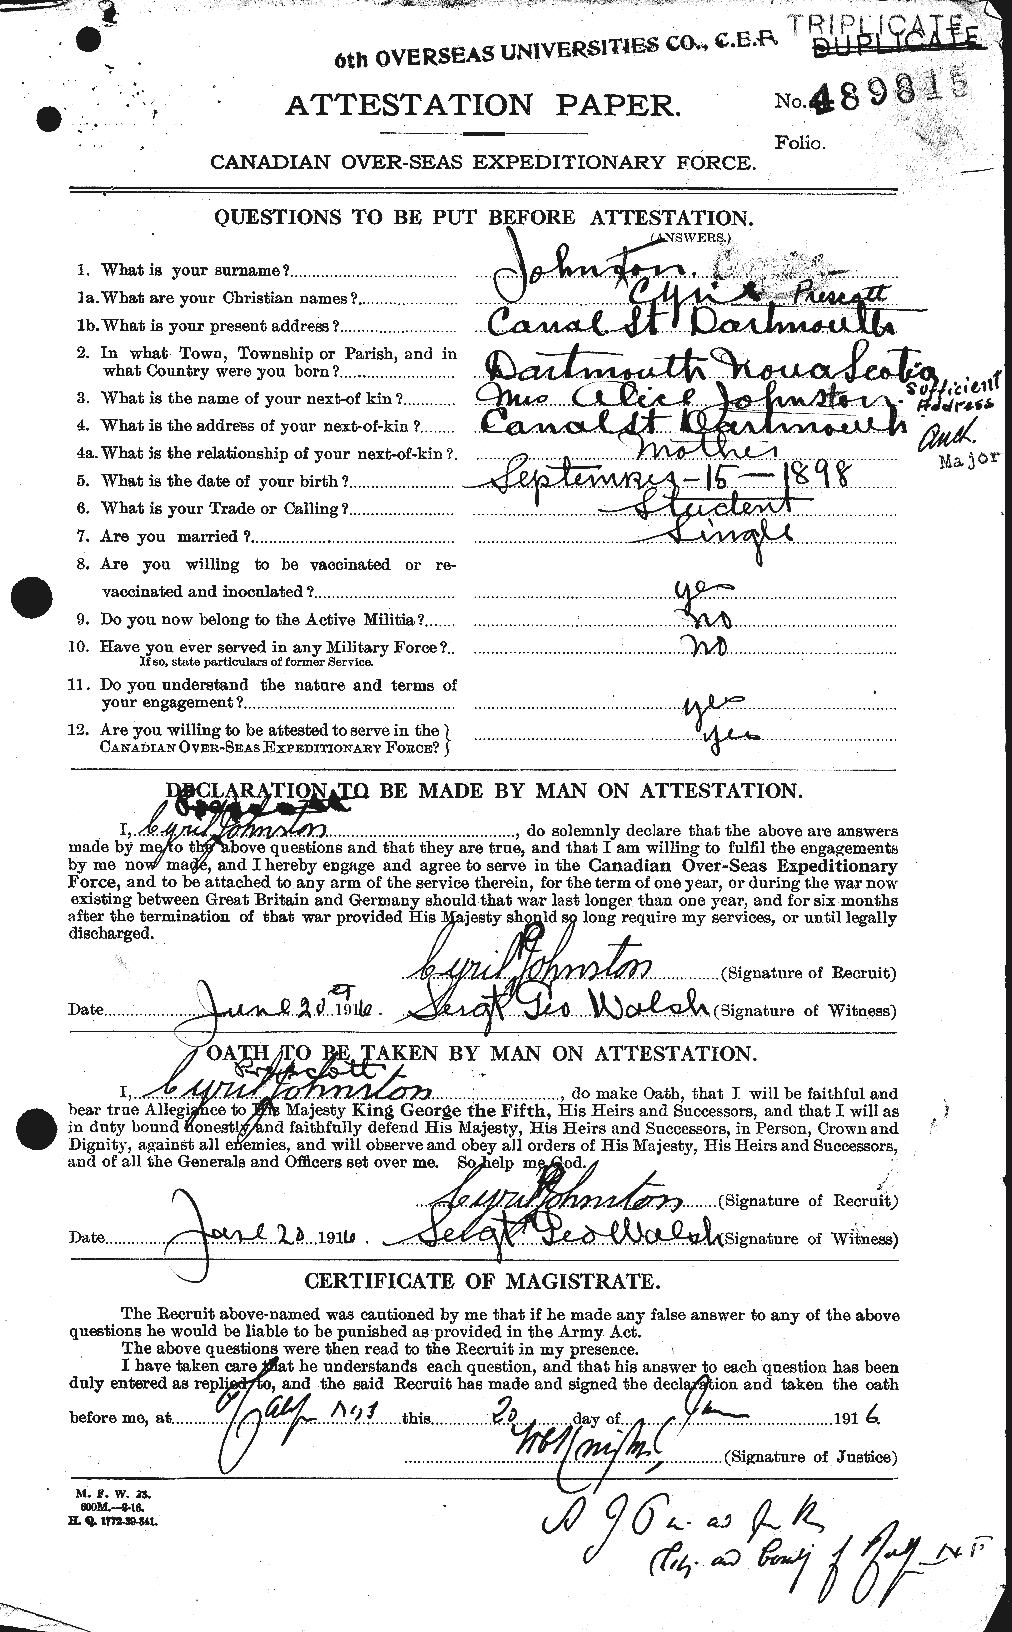 Personnel Records of the First World War - CEF 423147a